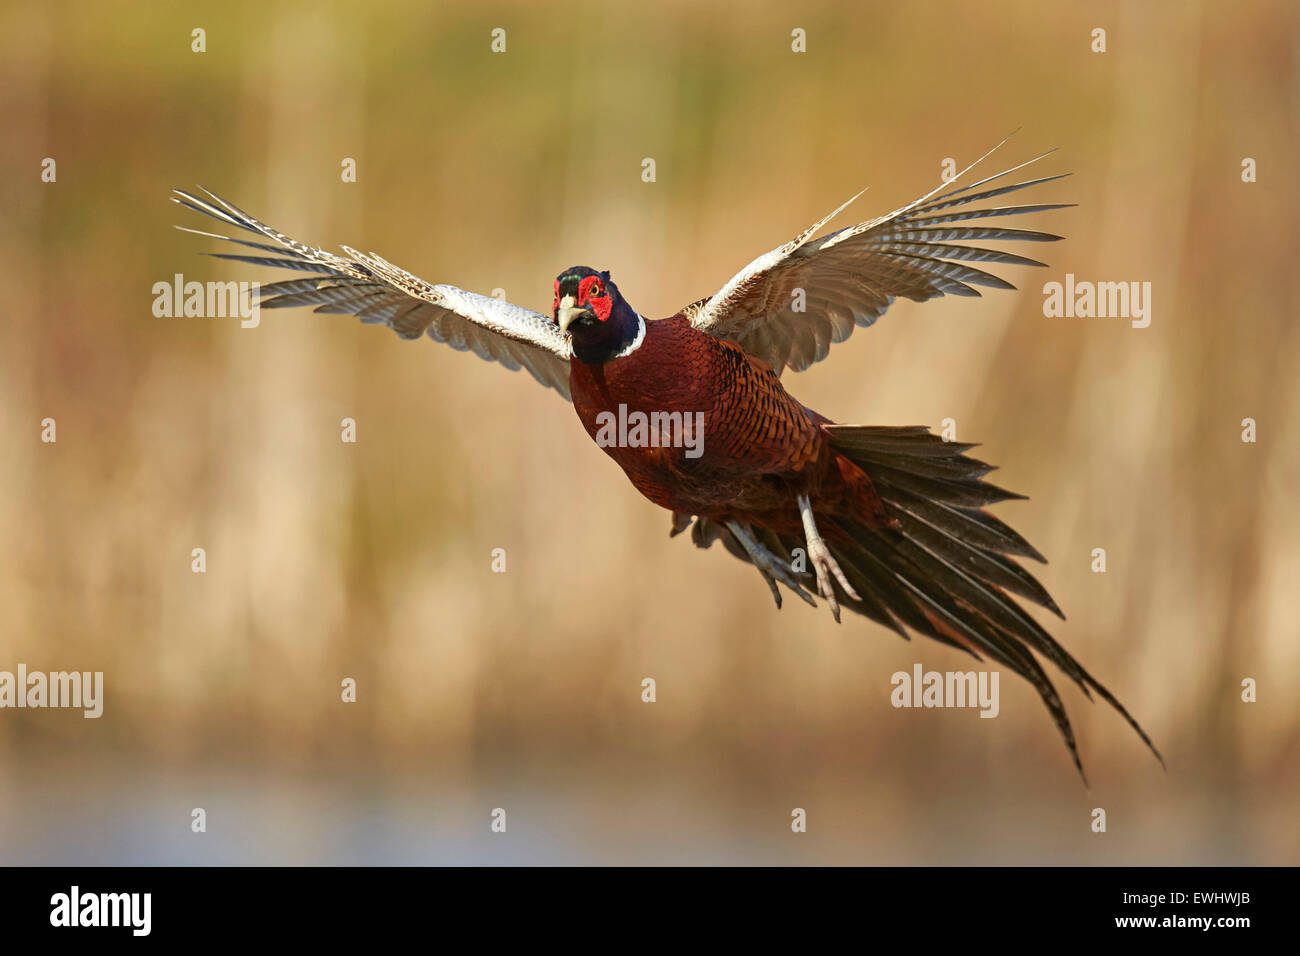 Rooster pheasant in flight in rich evening sunshine Stock Photo